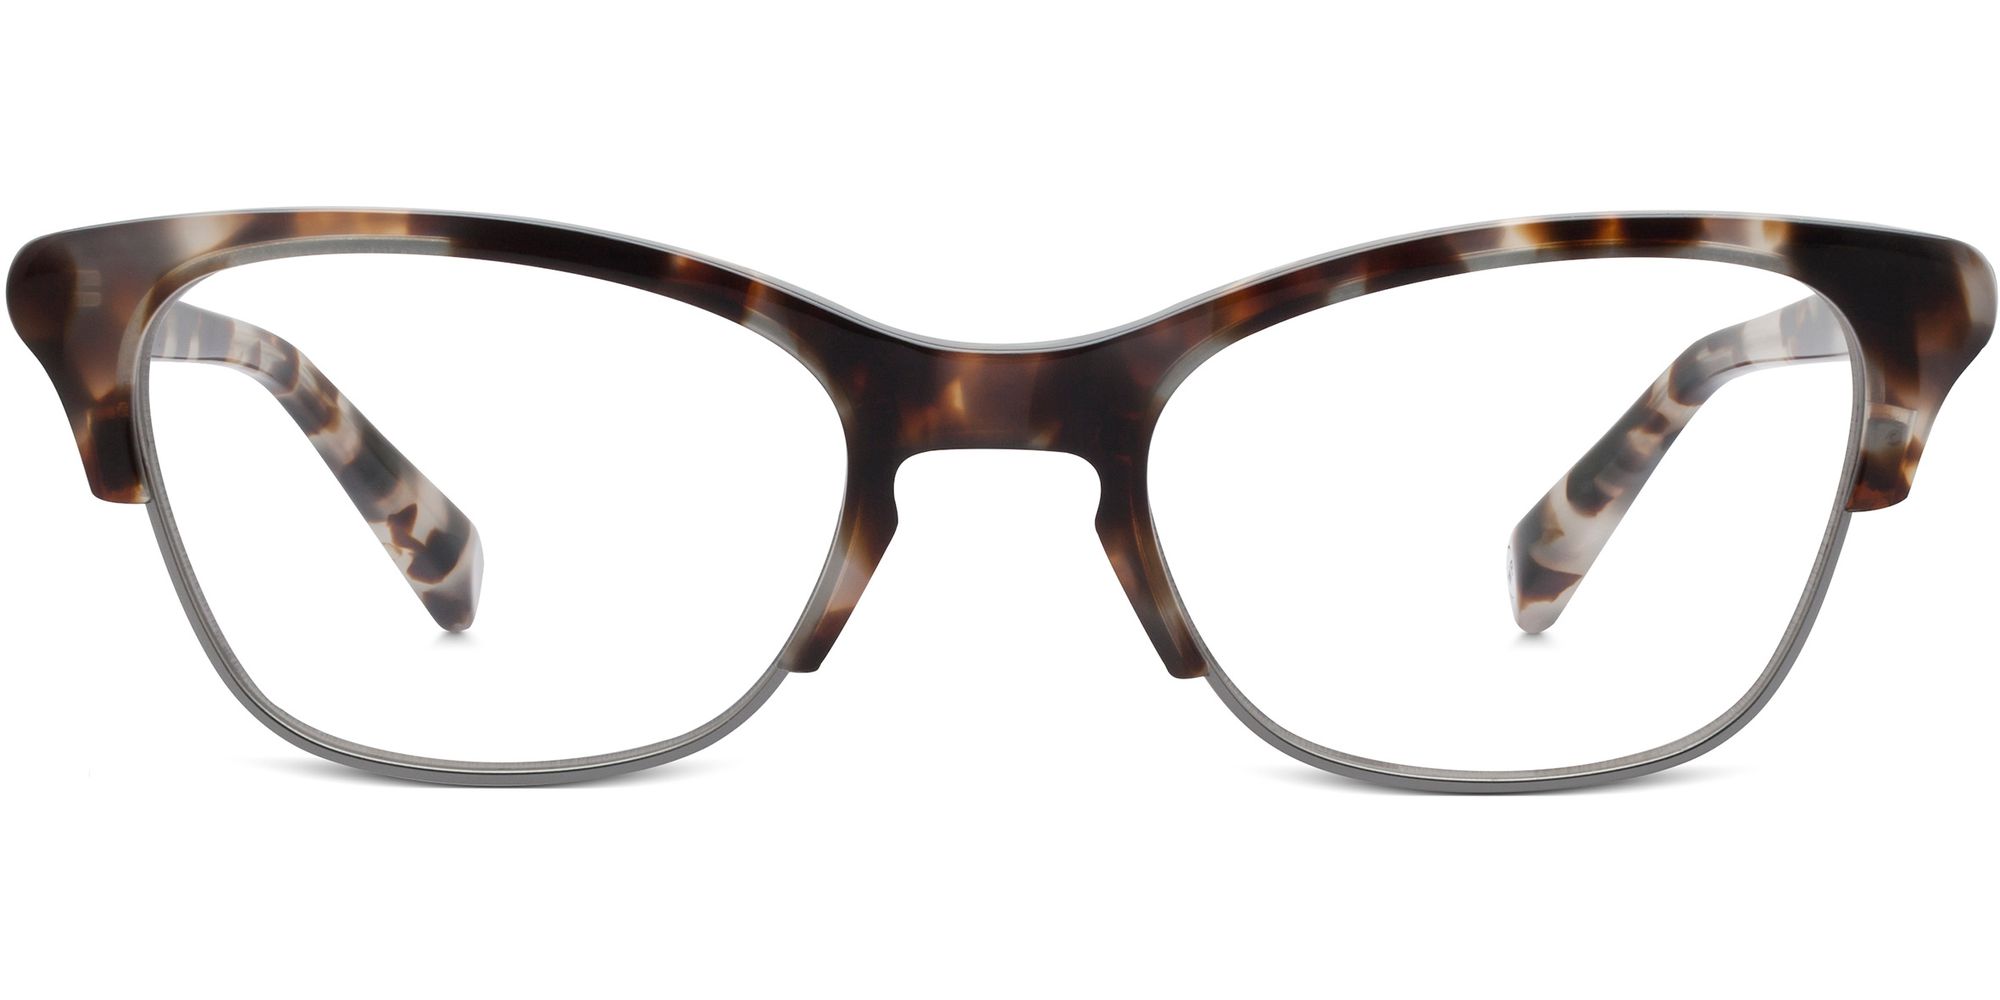 Warby Parker Holcomb Eyeglasses in Pearled Tortoise for Women